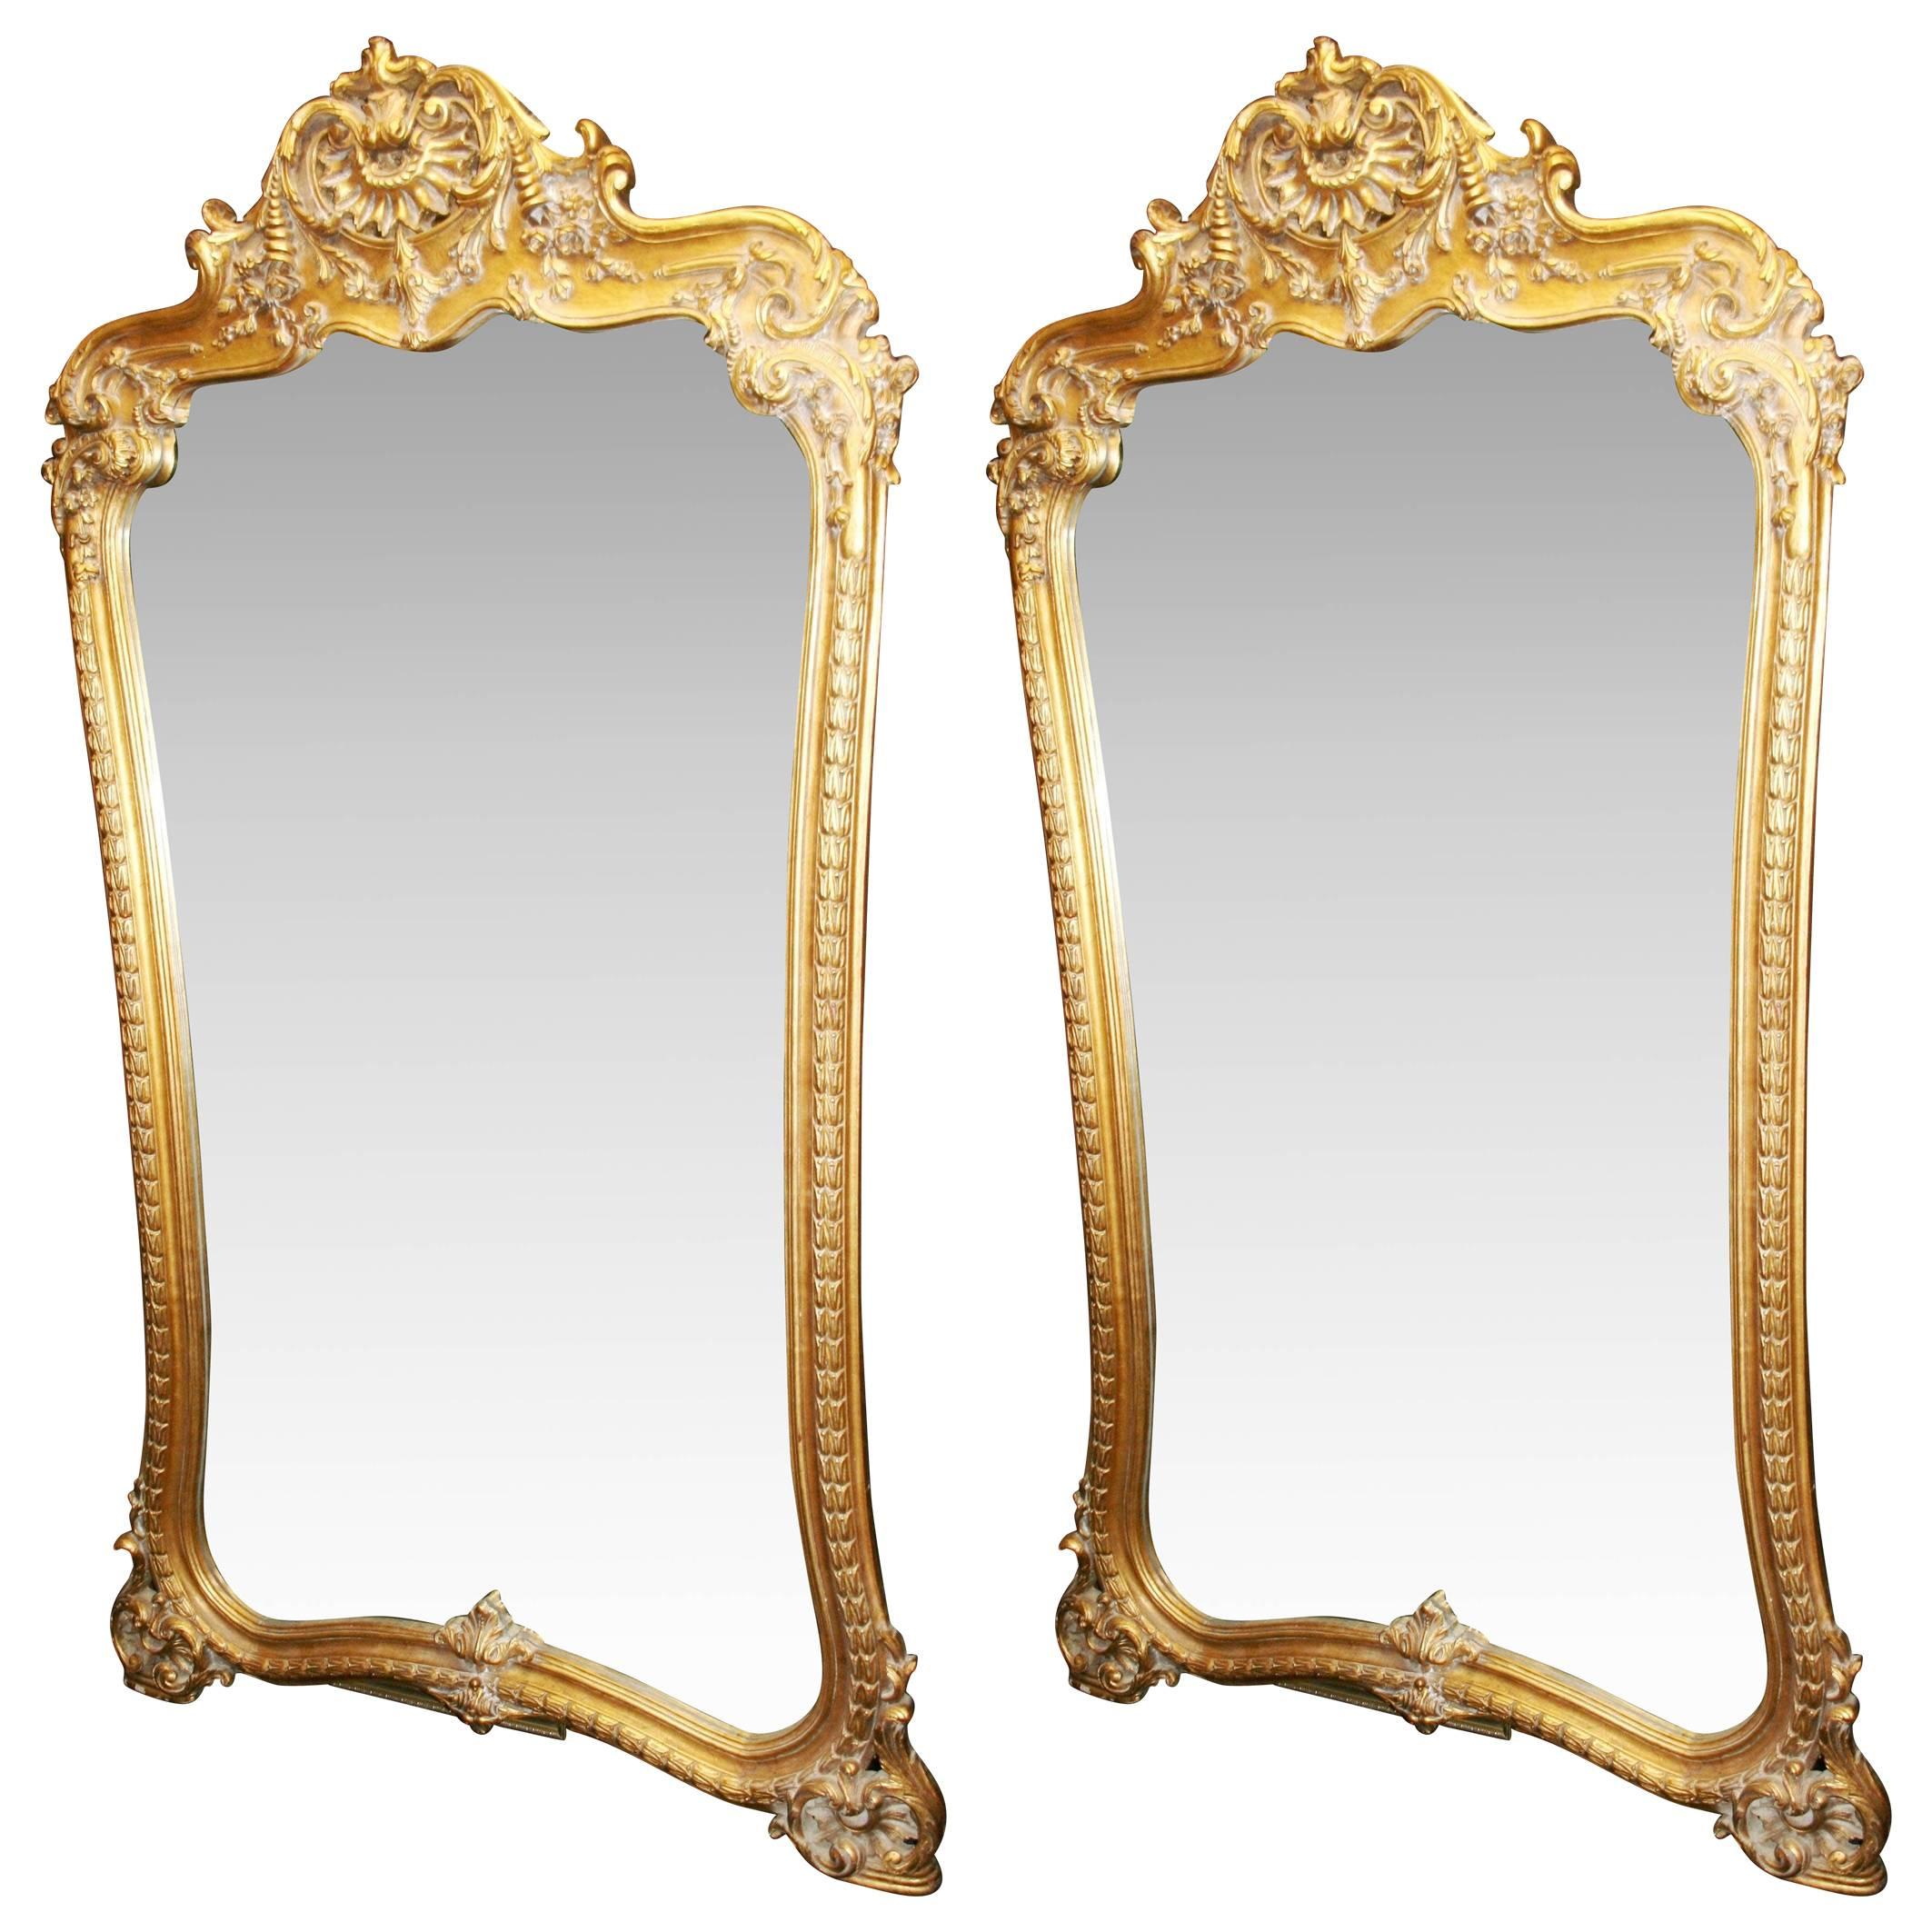 Fine Pair of Hand-Carved Gilt Louis XV Style Mirrors